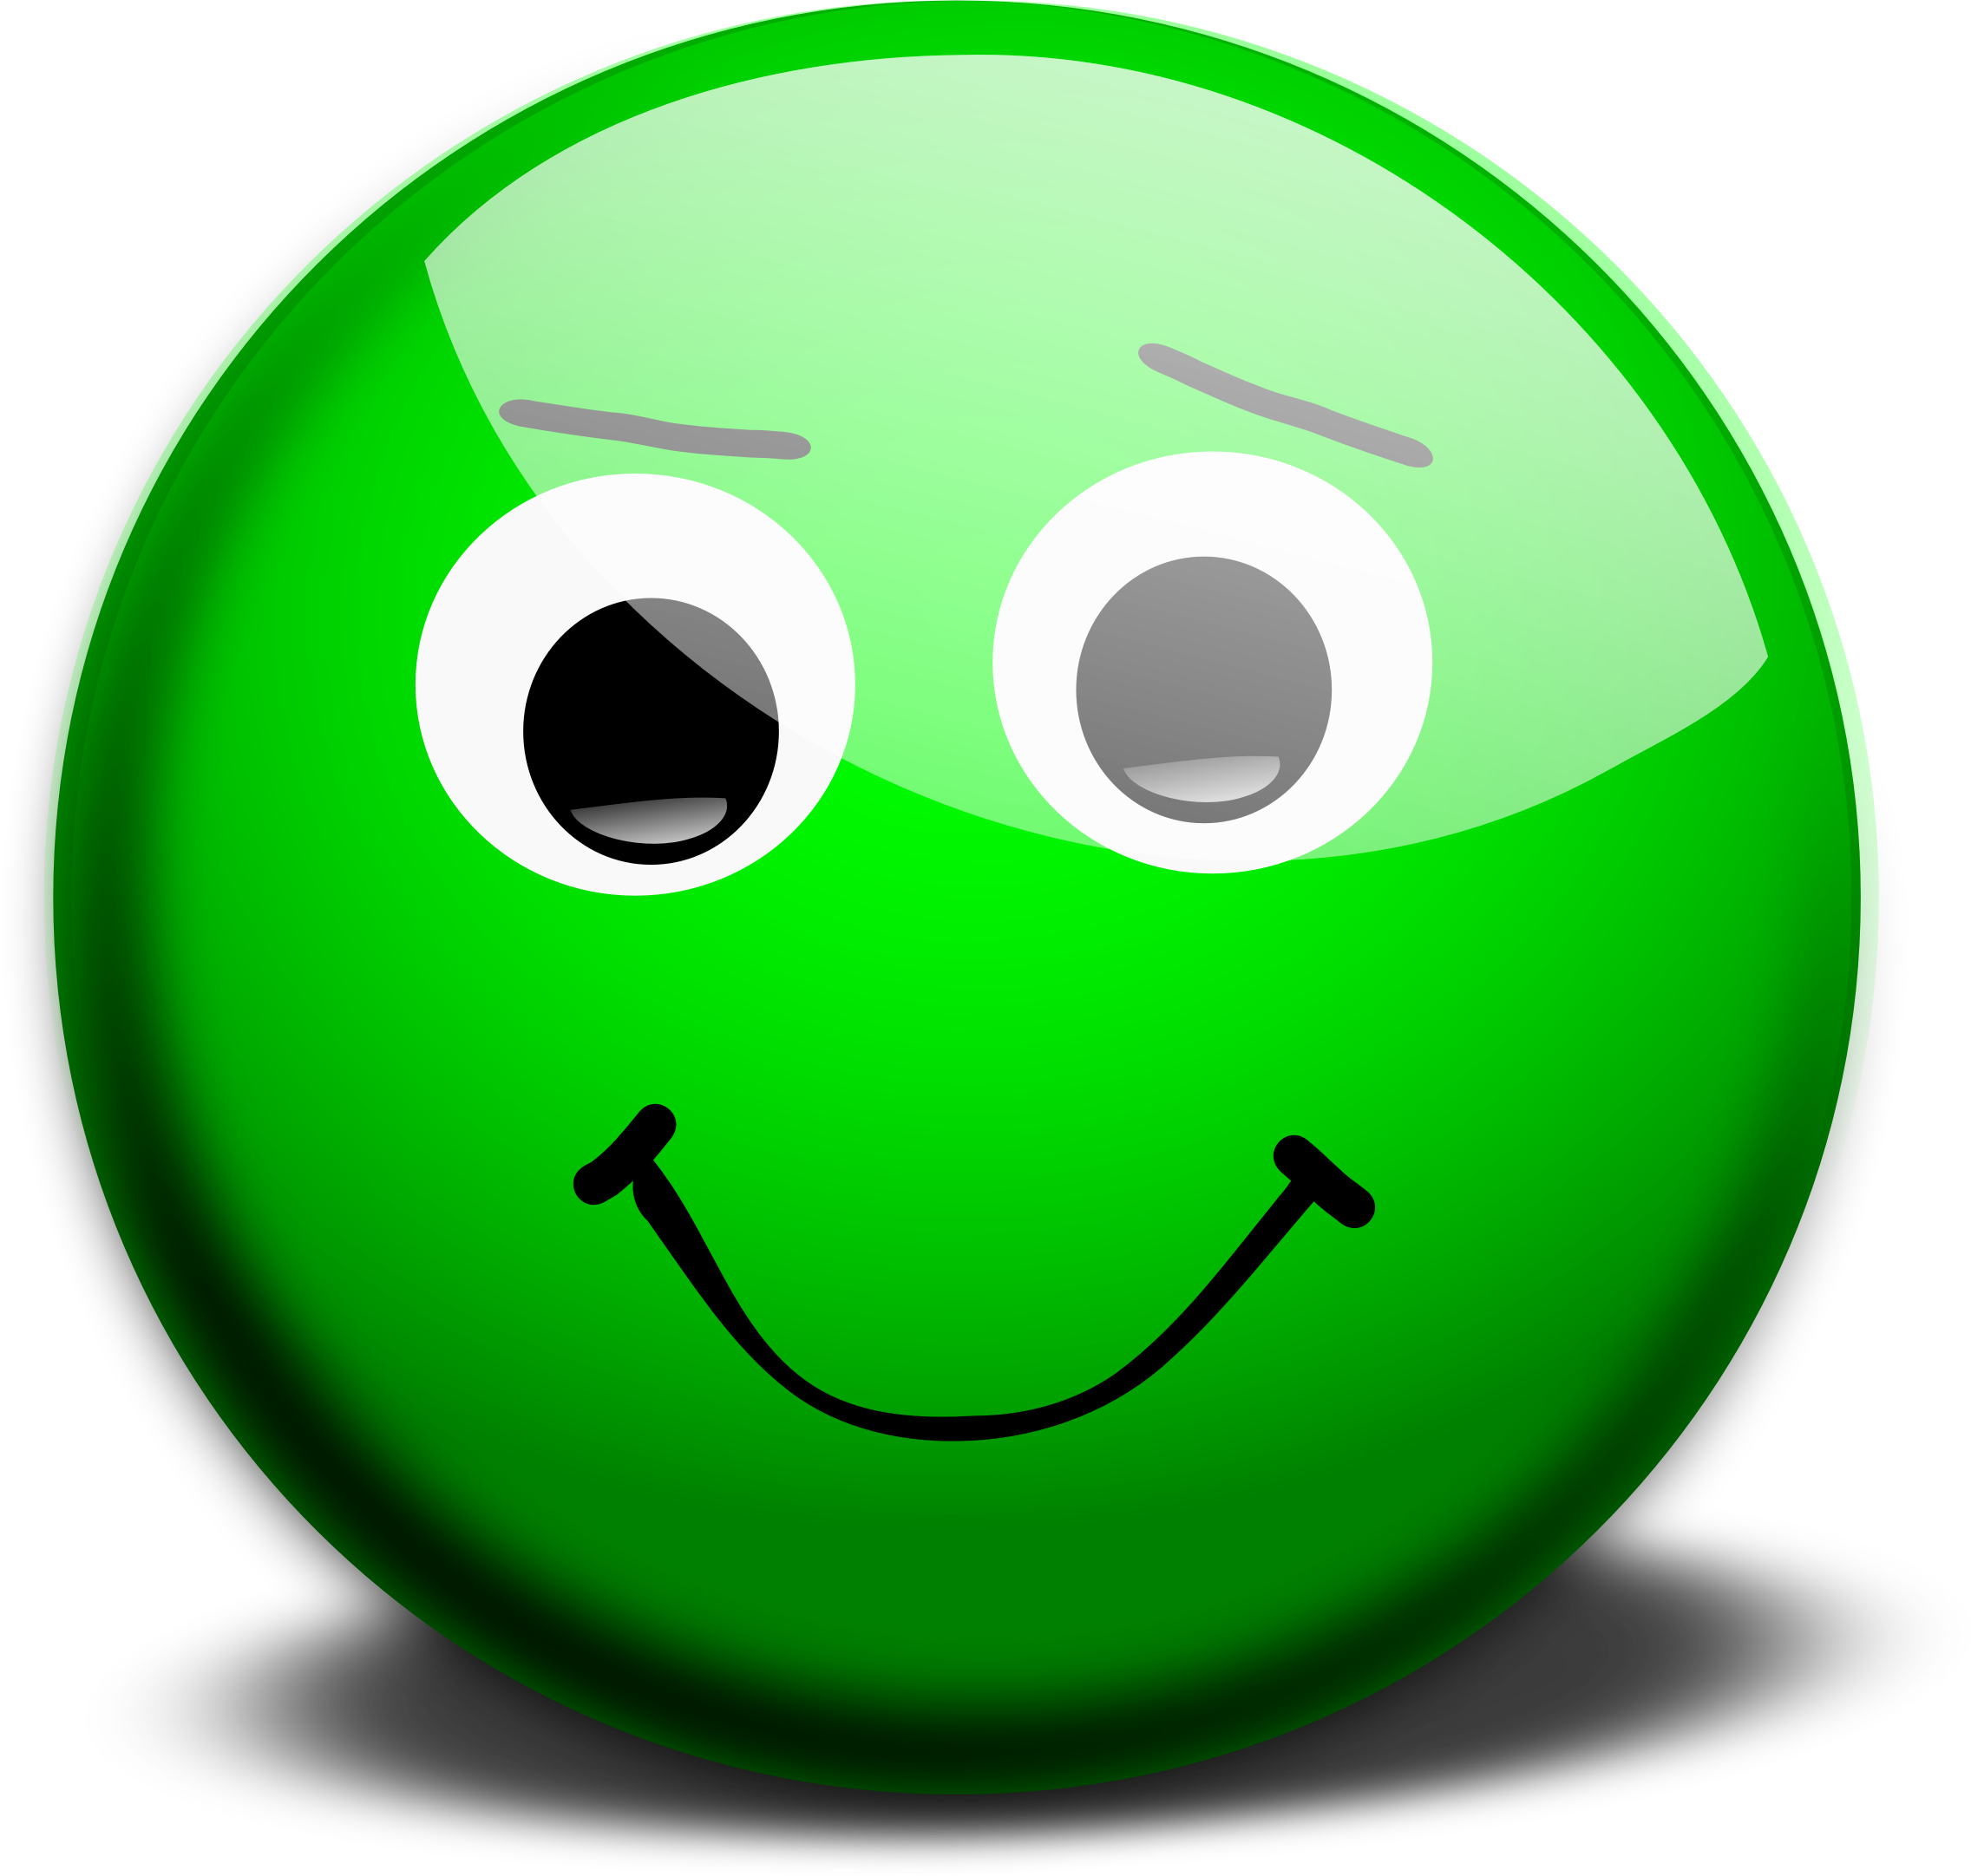 Smiley Face PNG Images HD